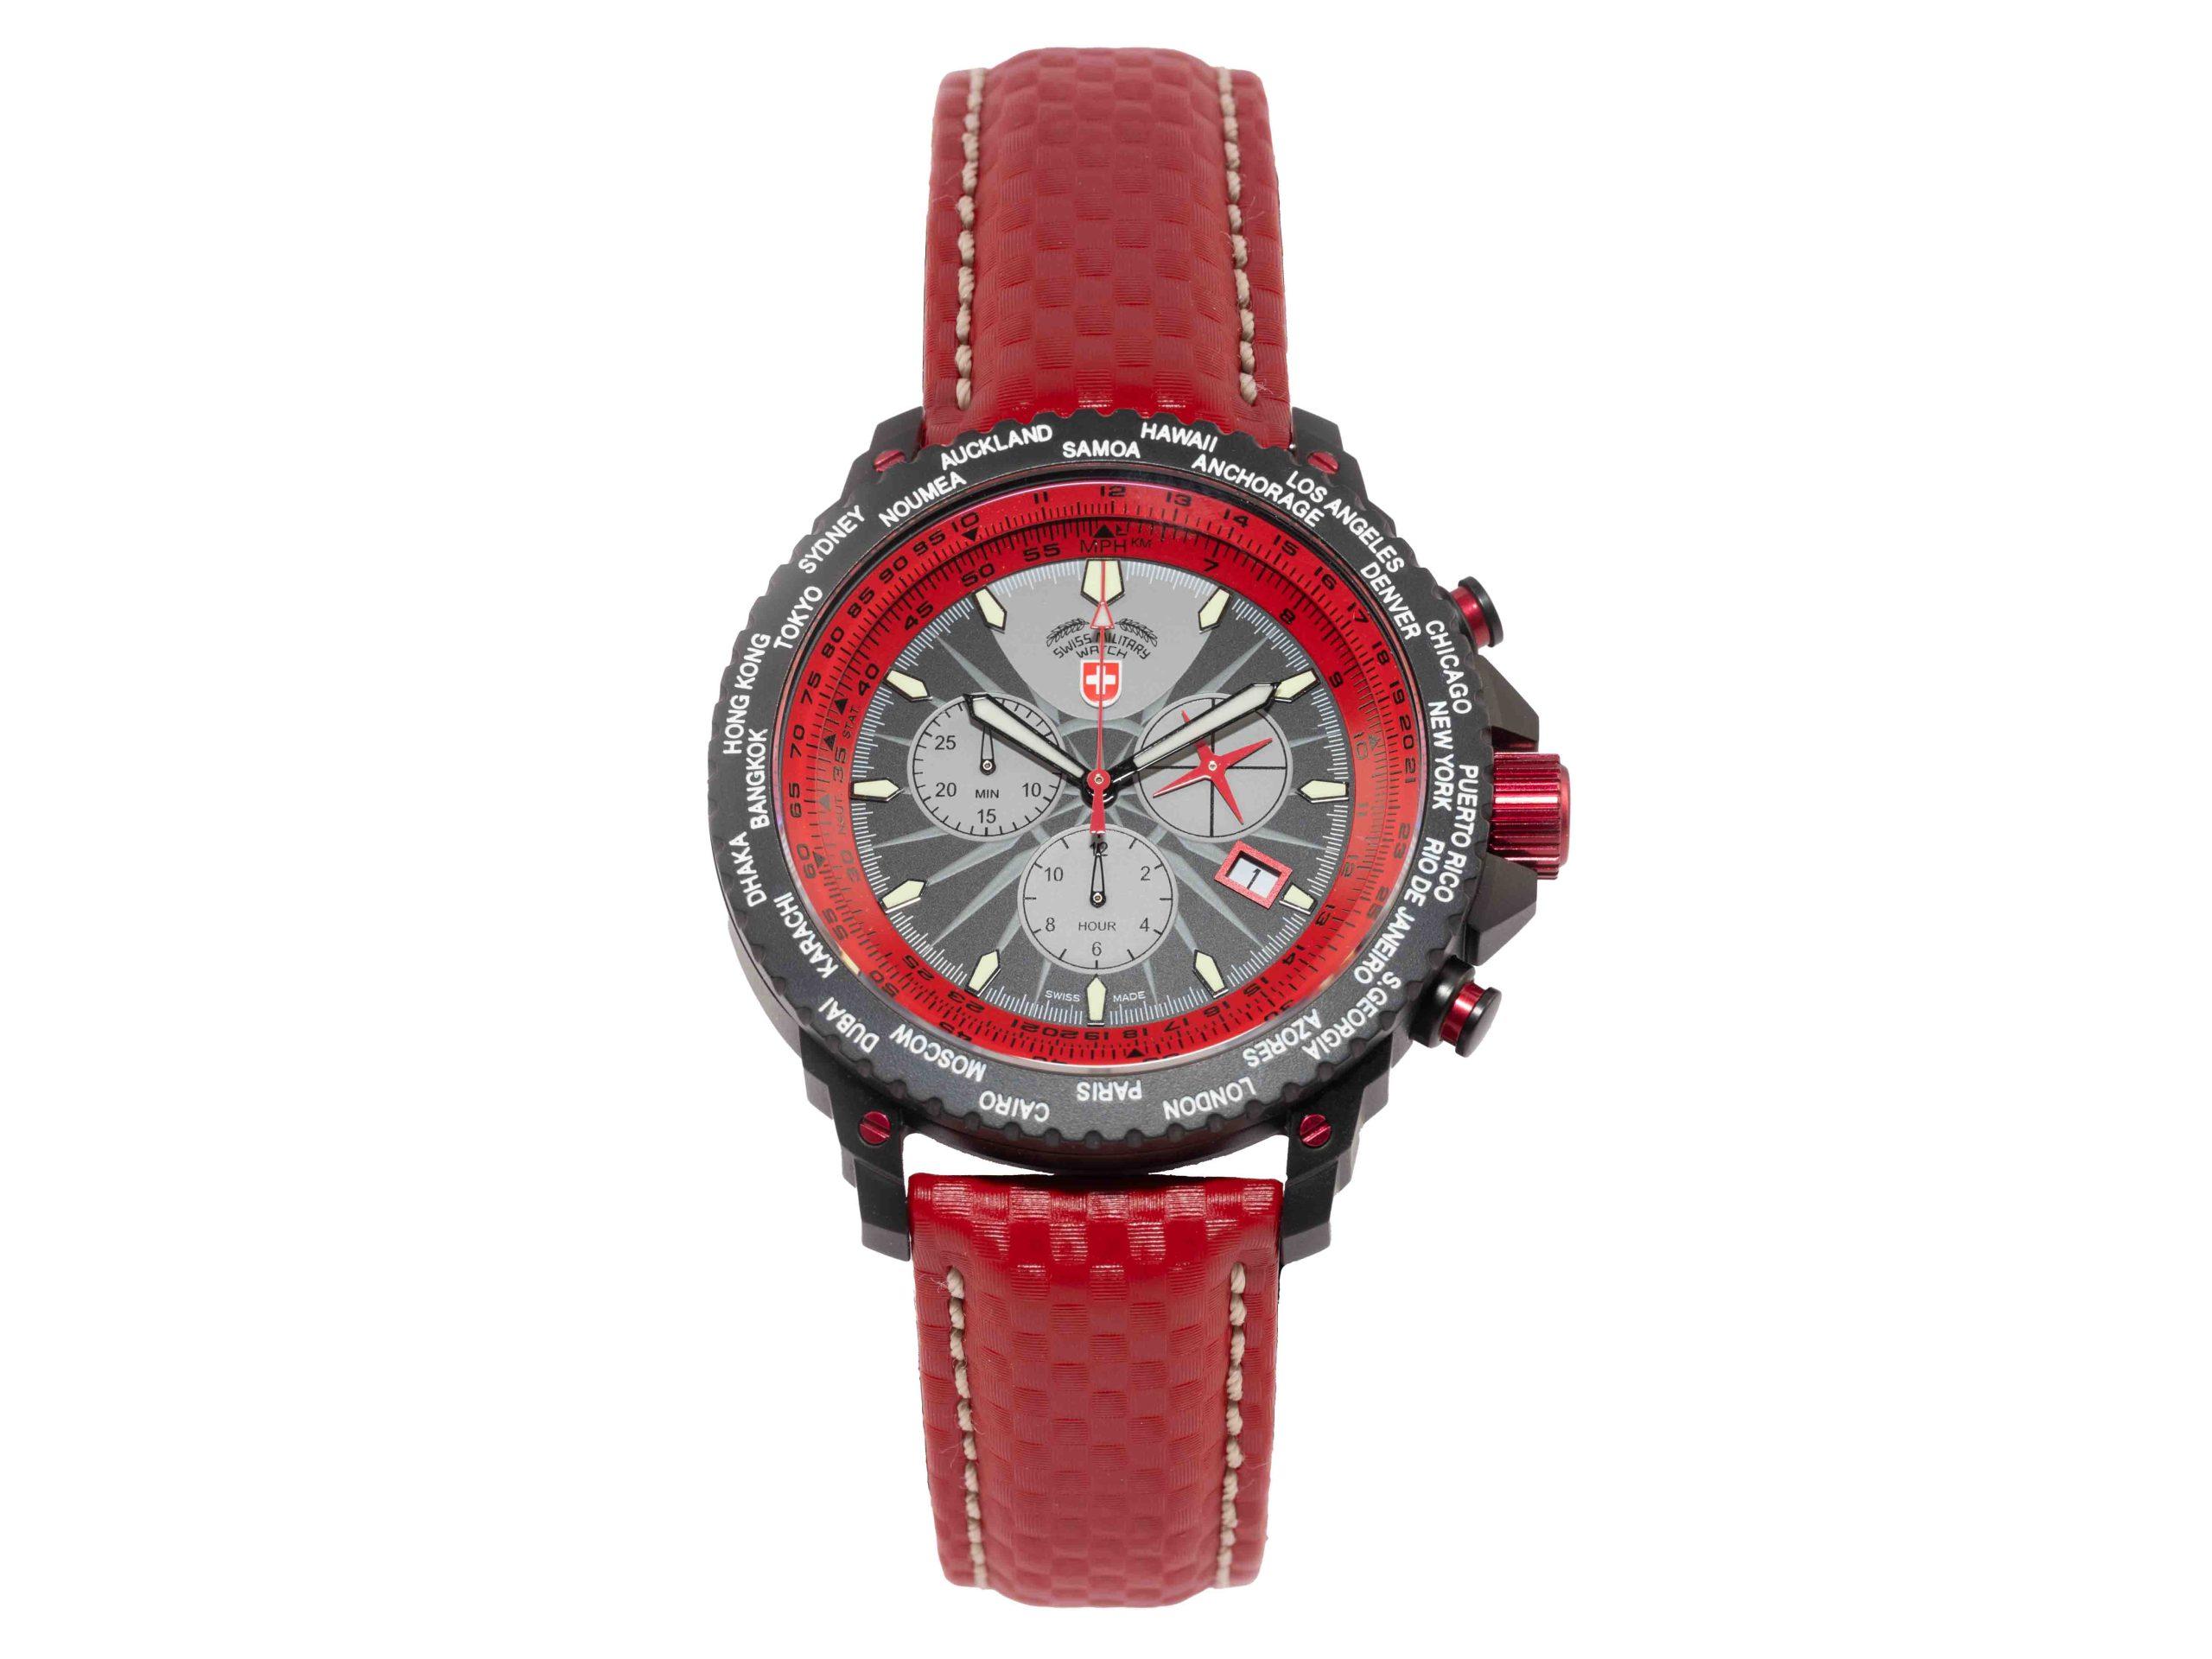 Hero shot of a red Swiss Military watch, by Seb Duper